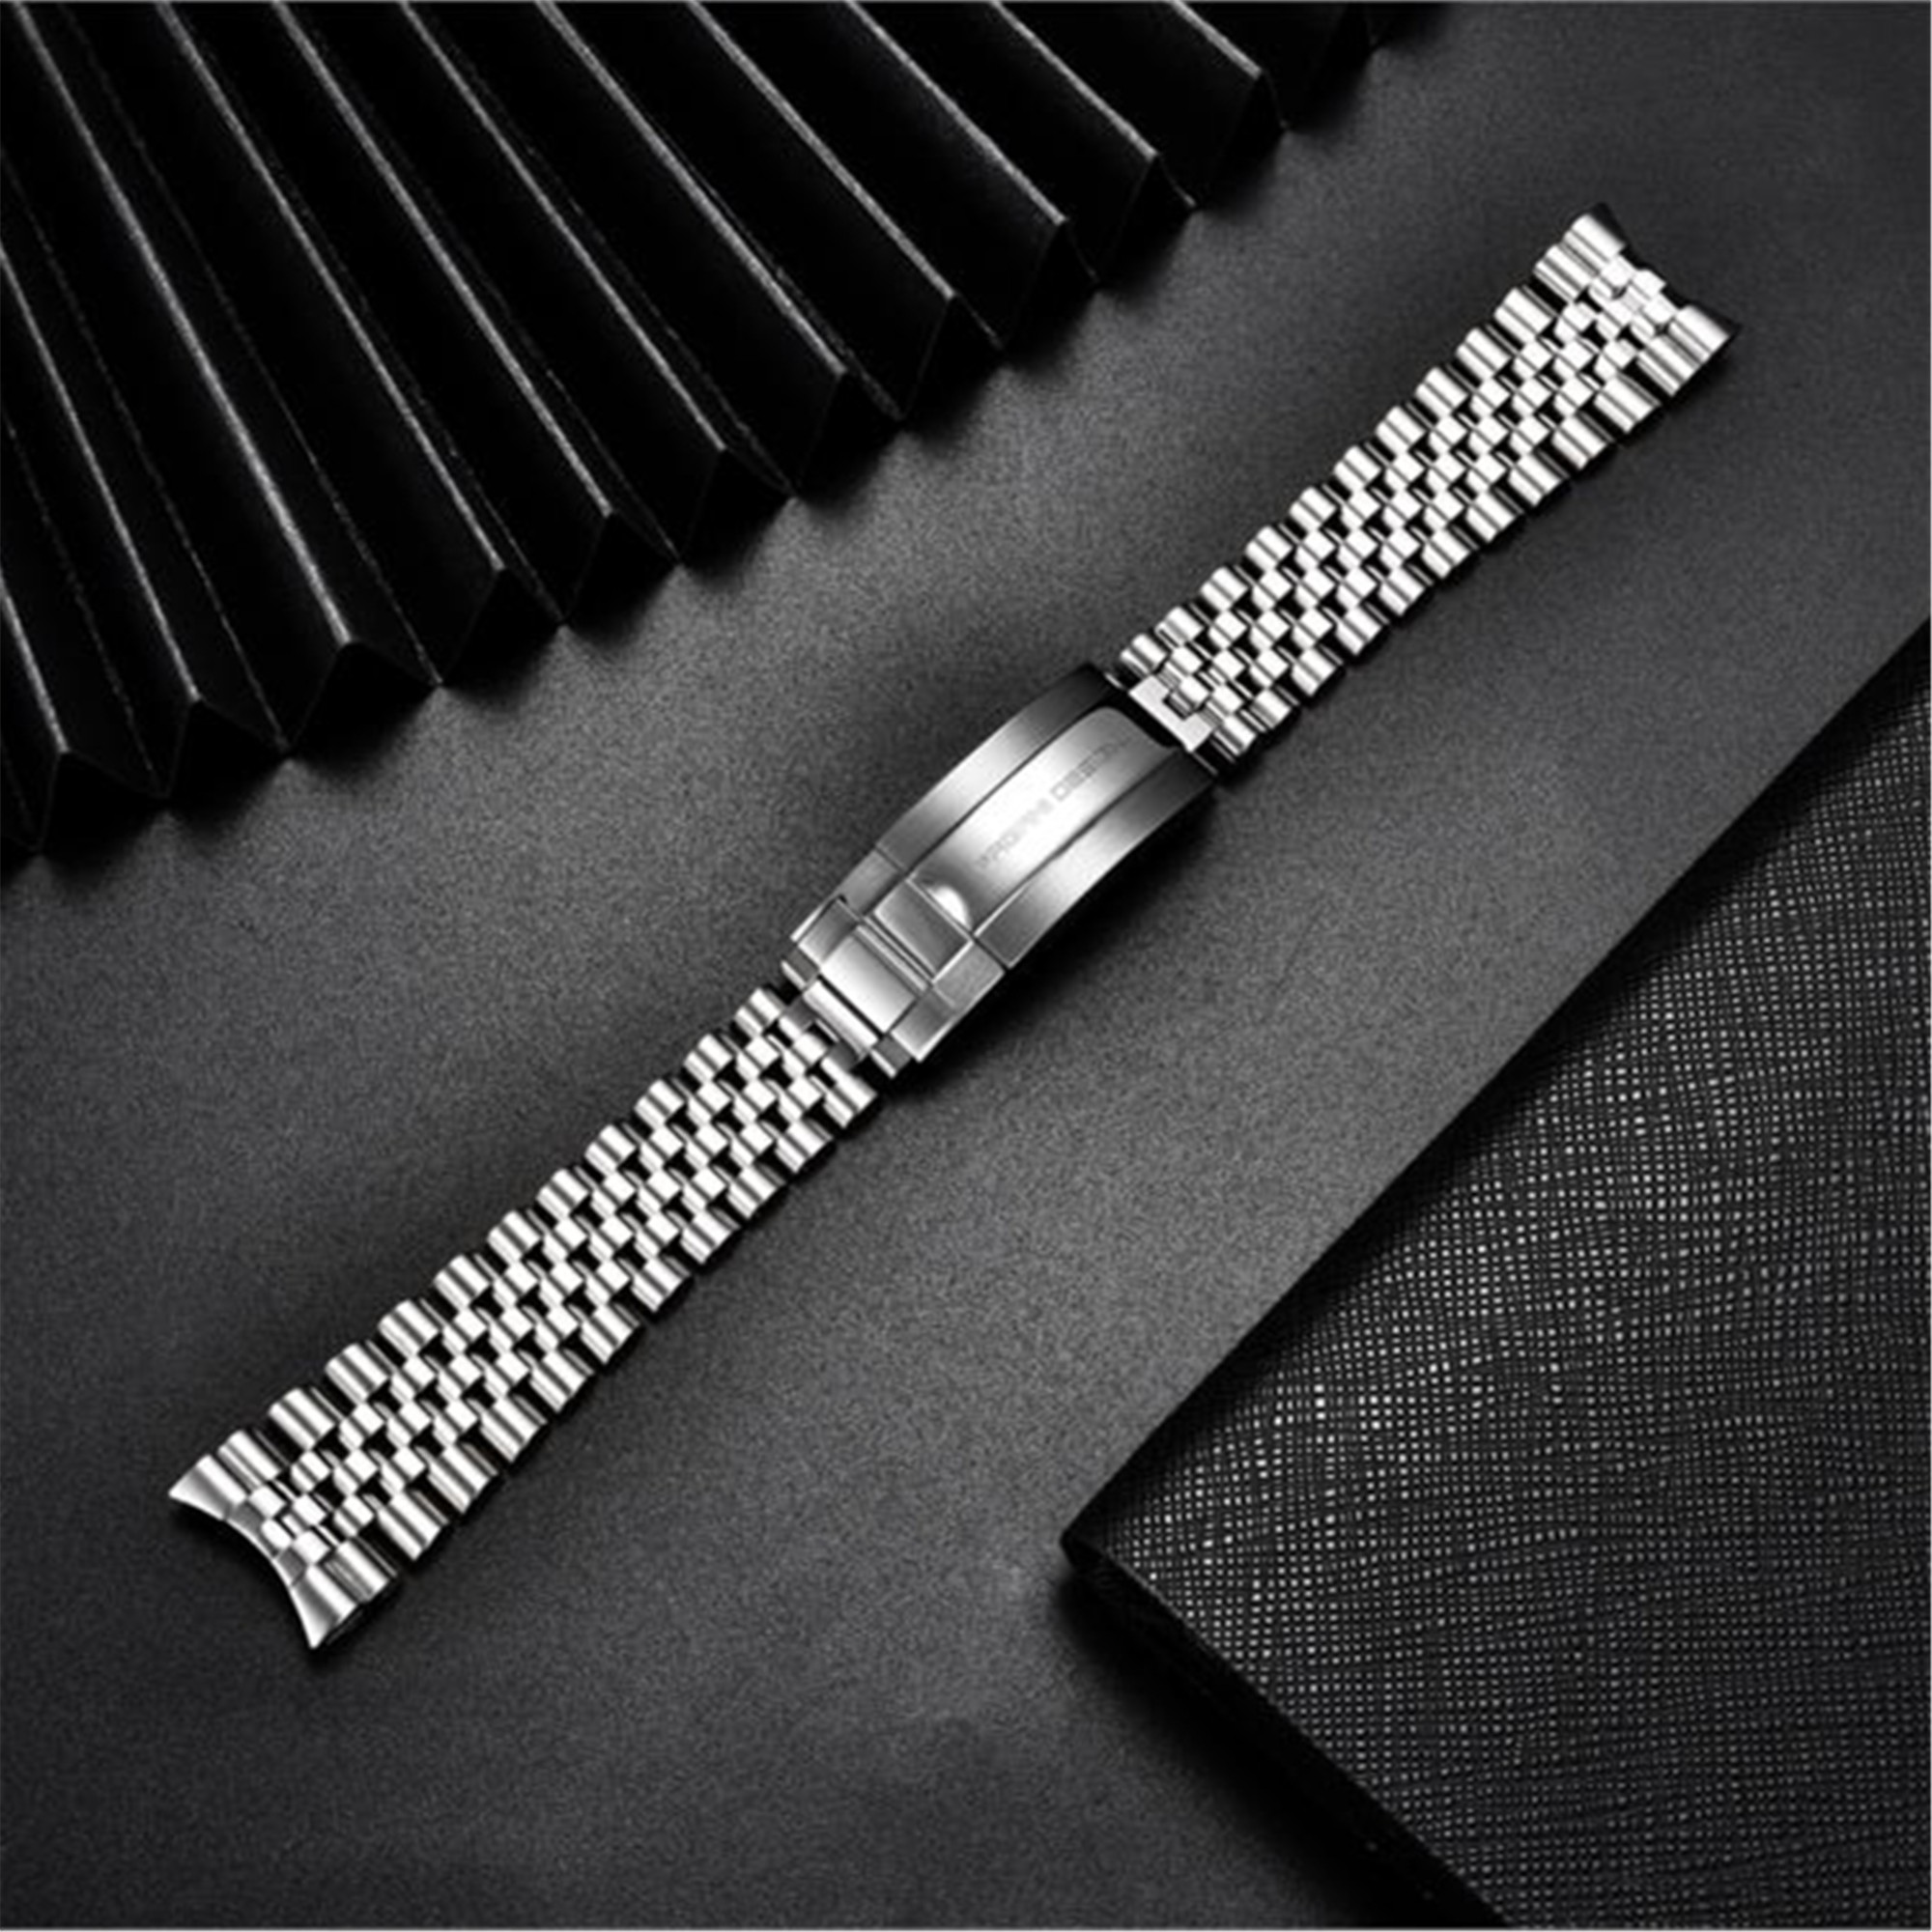 PAGANI DESIGN Original For PD1661,PD1662.PD1651 Watch 316L Stainless Steel Band Jubilee Band Bracelet Width 20mm, Length 220mm